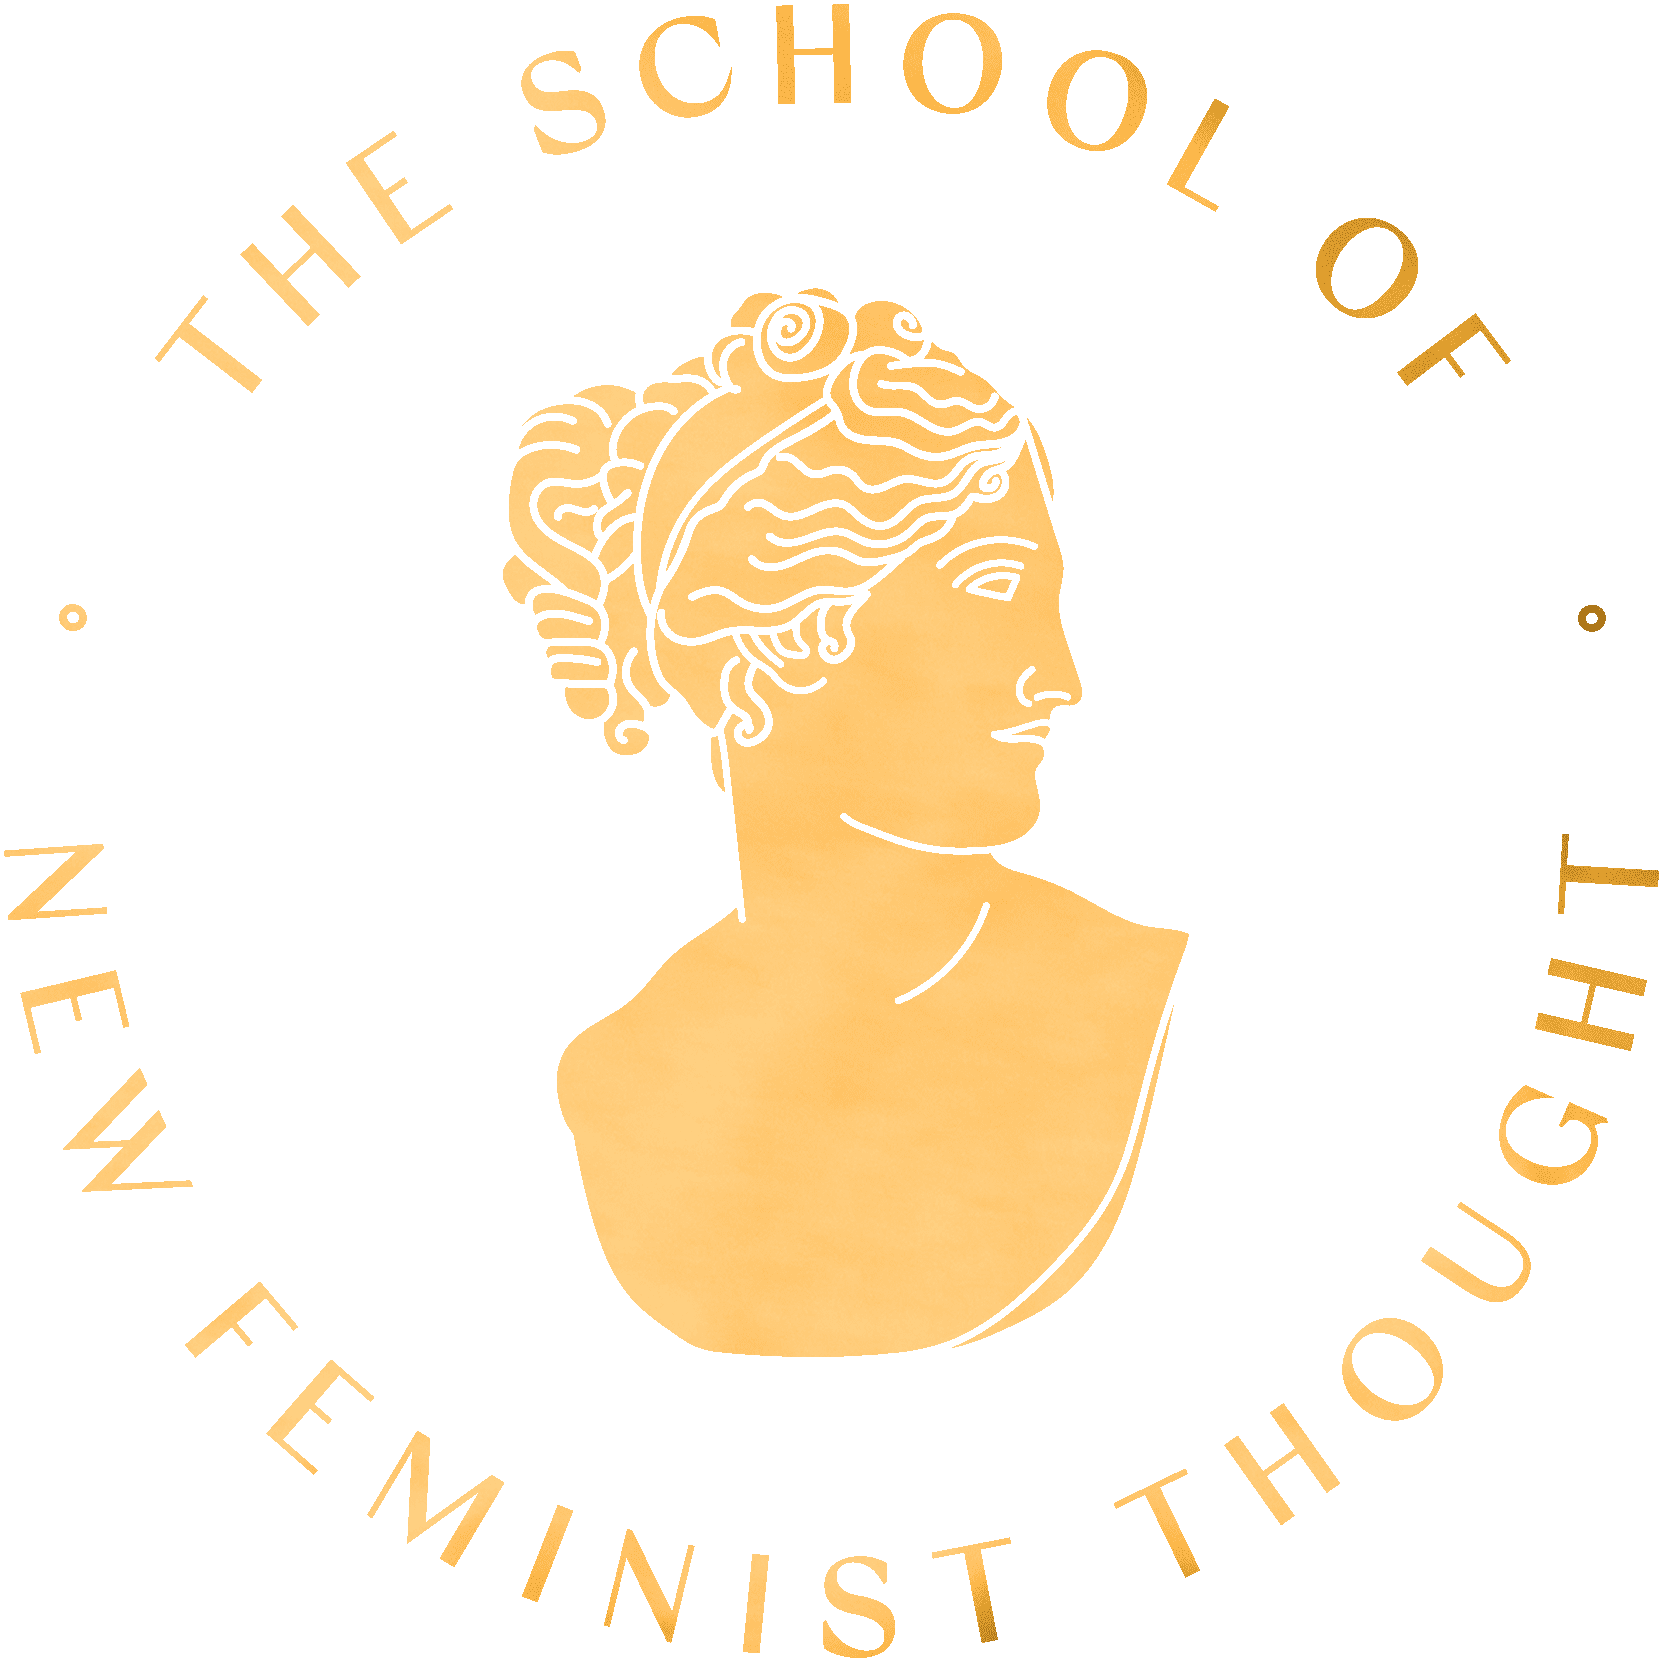 The School of New Feminist Thought Crest with an illustration of a female bust in the center.